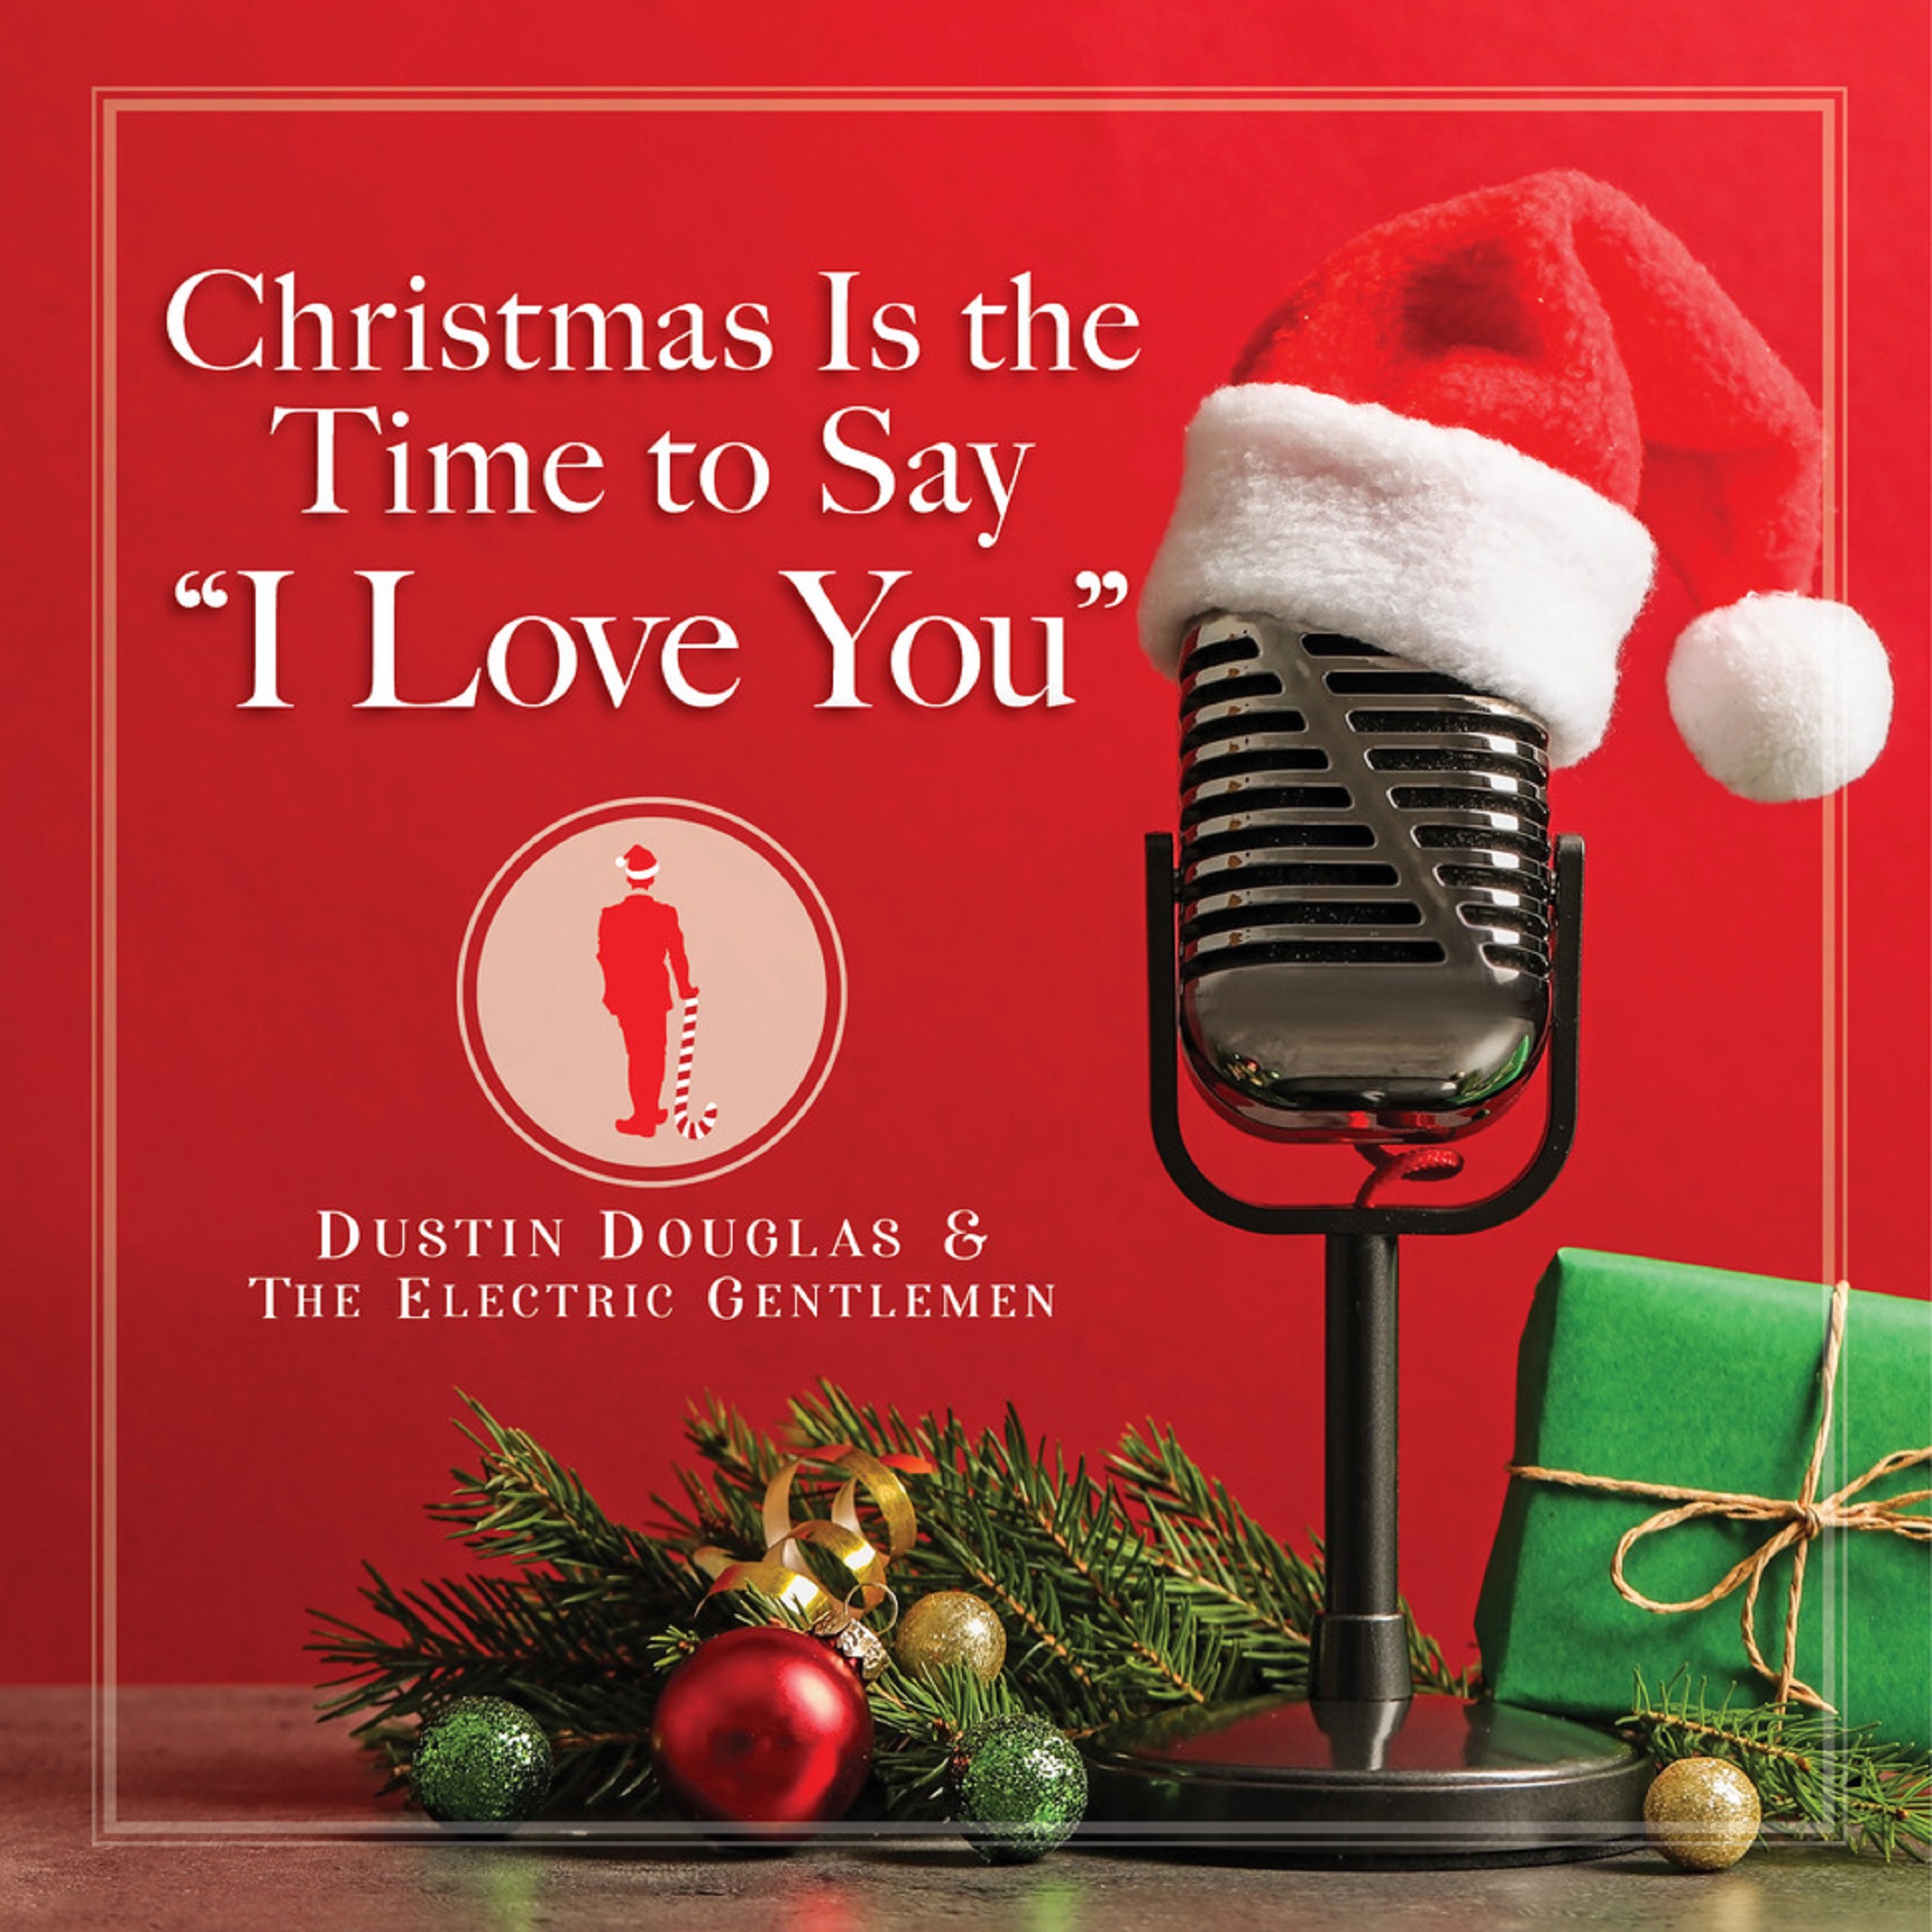 Dustin Douglas & The Electric Gentlemen   to Gift Fans with a Rollicking Rendition of “Christmas is the Time to Say I Love You”